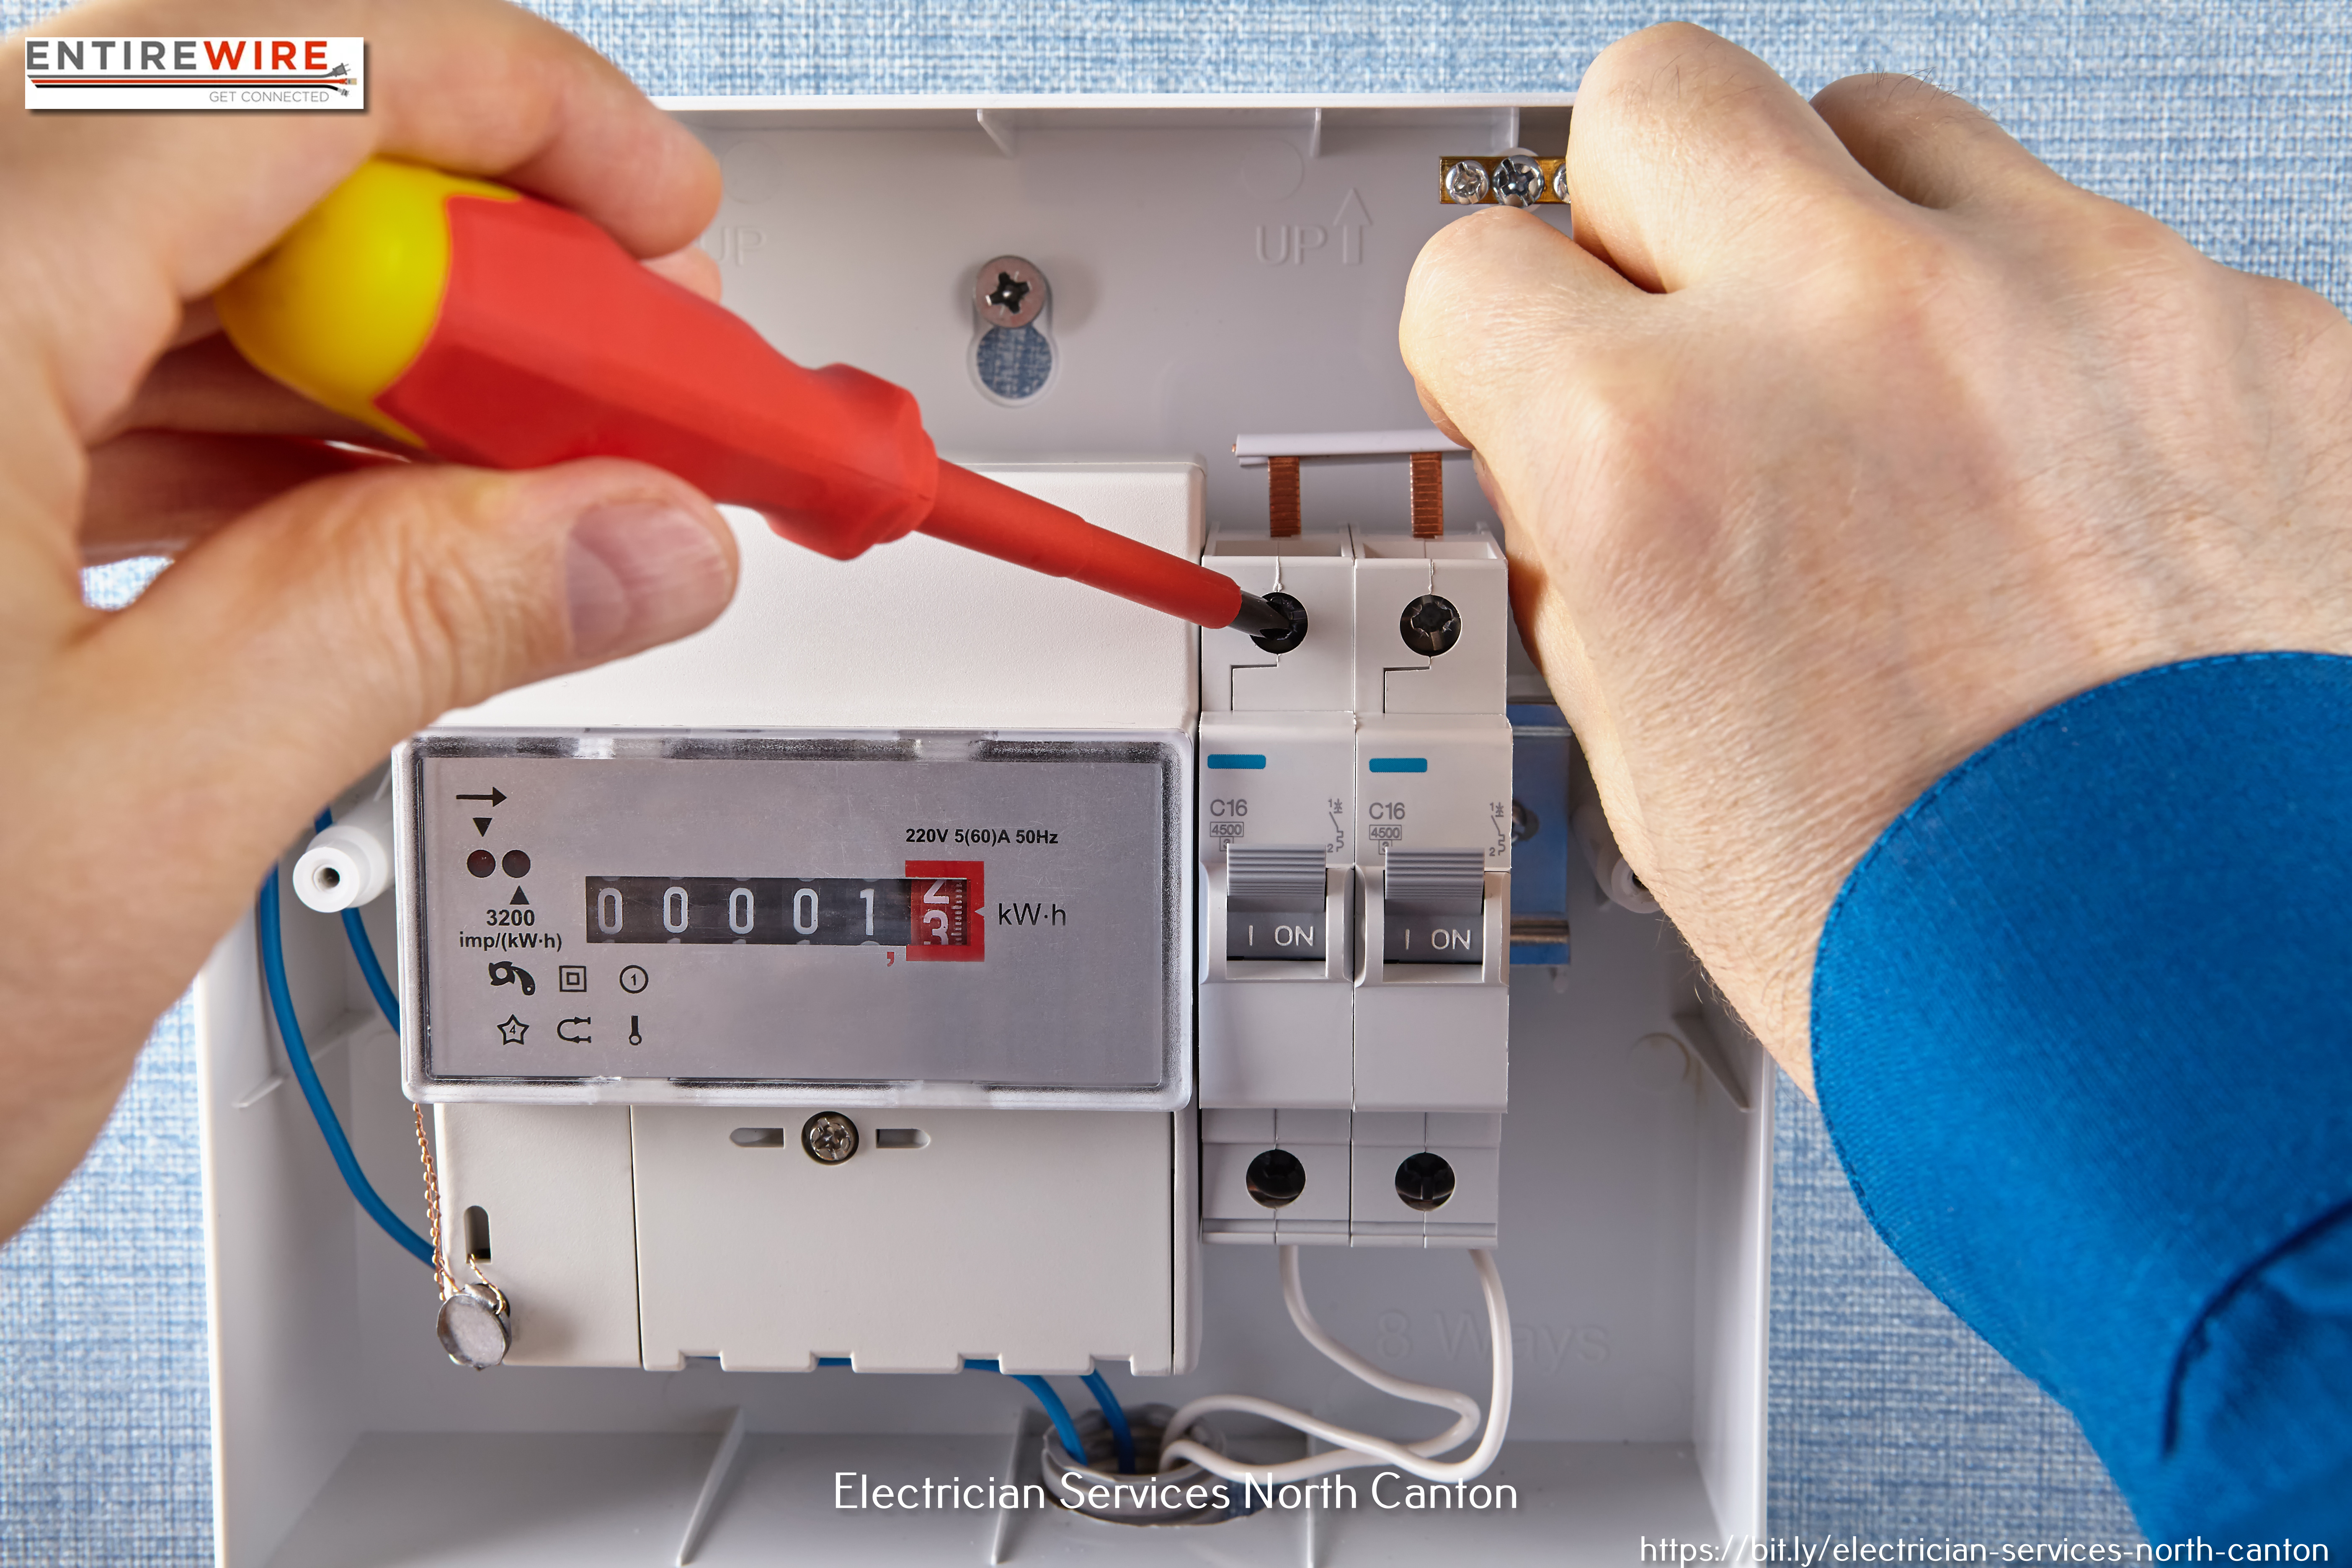 Entirewire Inc. North Canton Shares Why People Should Hire Professional Electricians